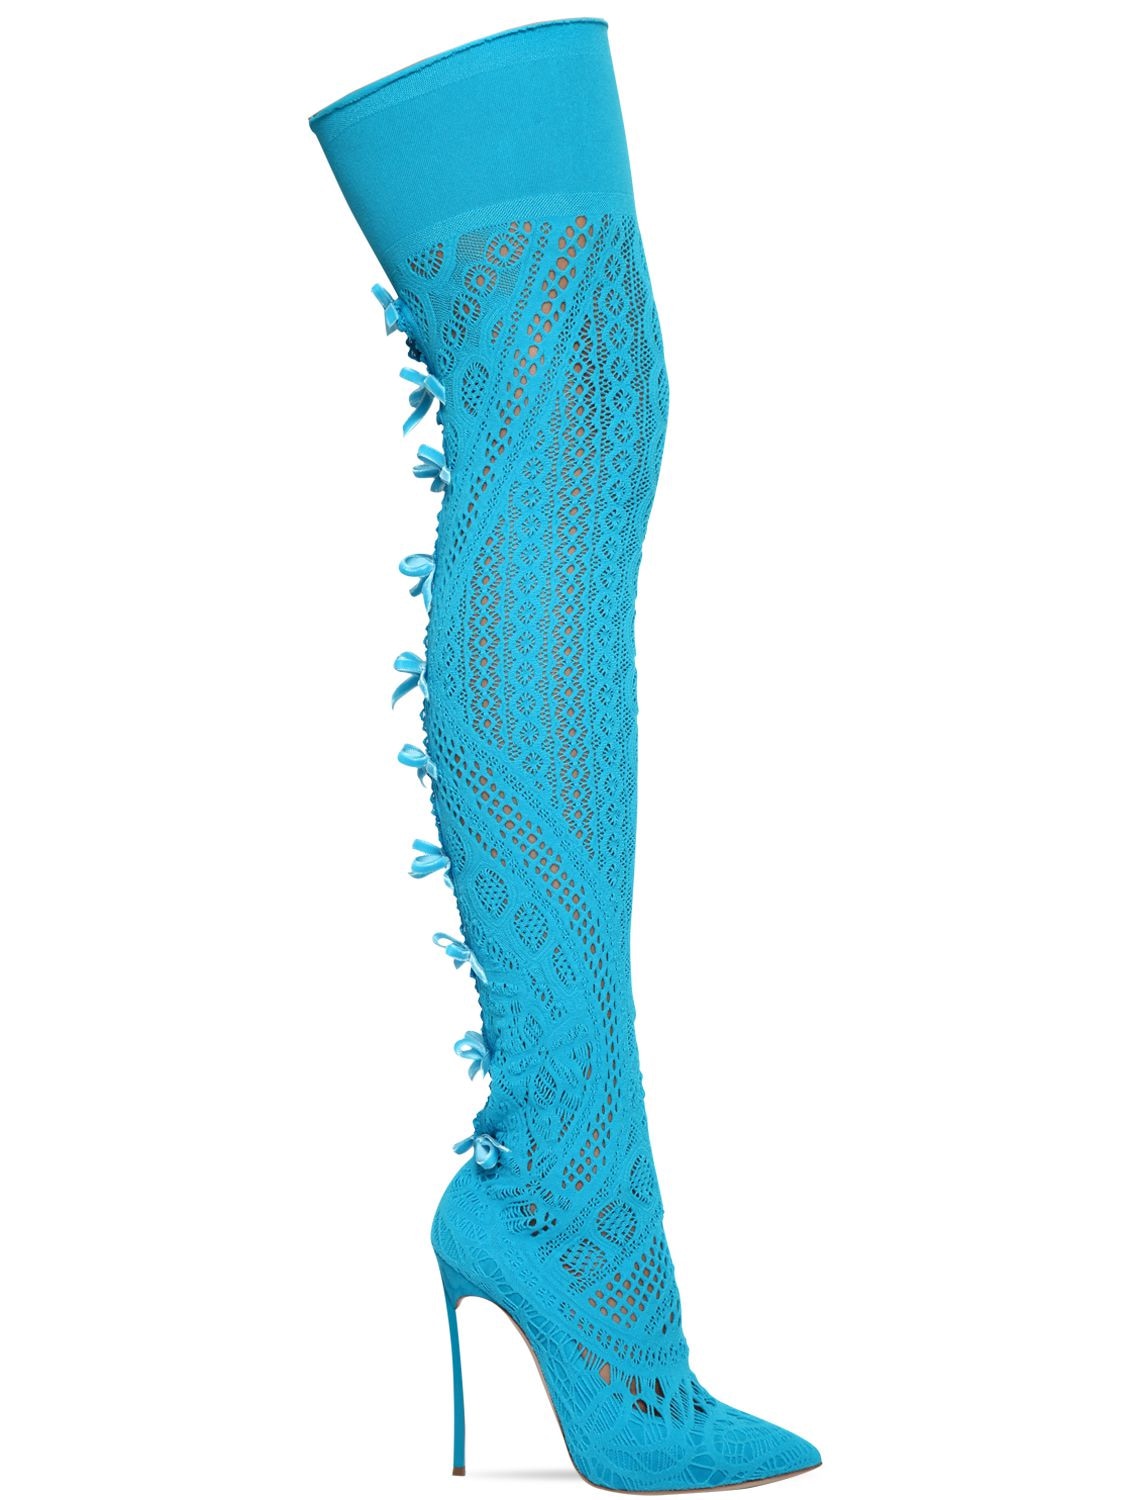 Casadei 120mm Stretch Knit Over The Knee Boots In Turquoise